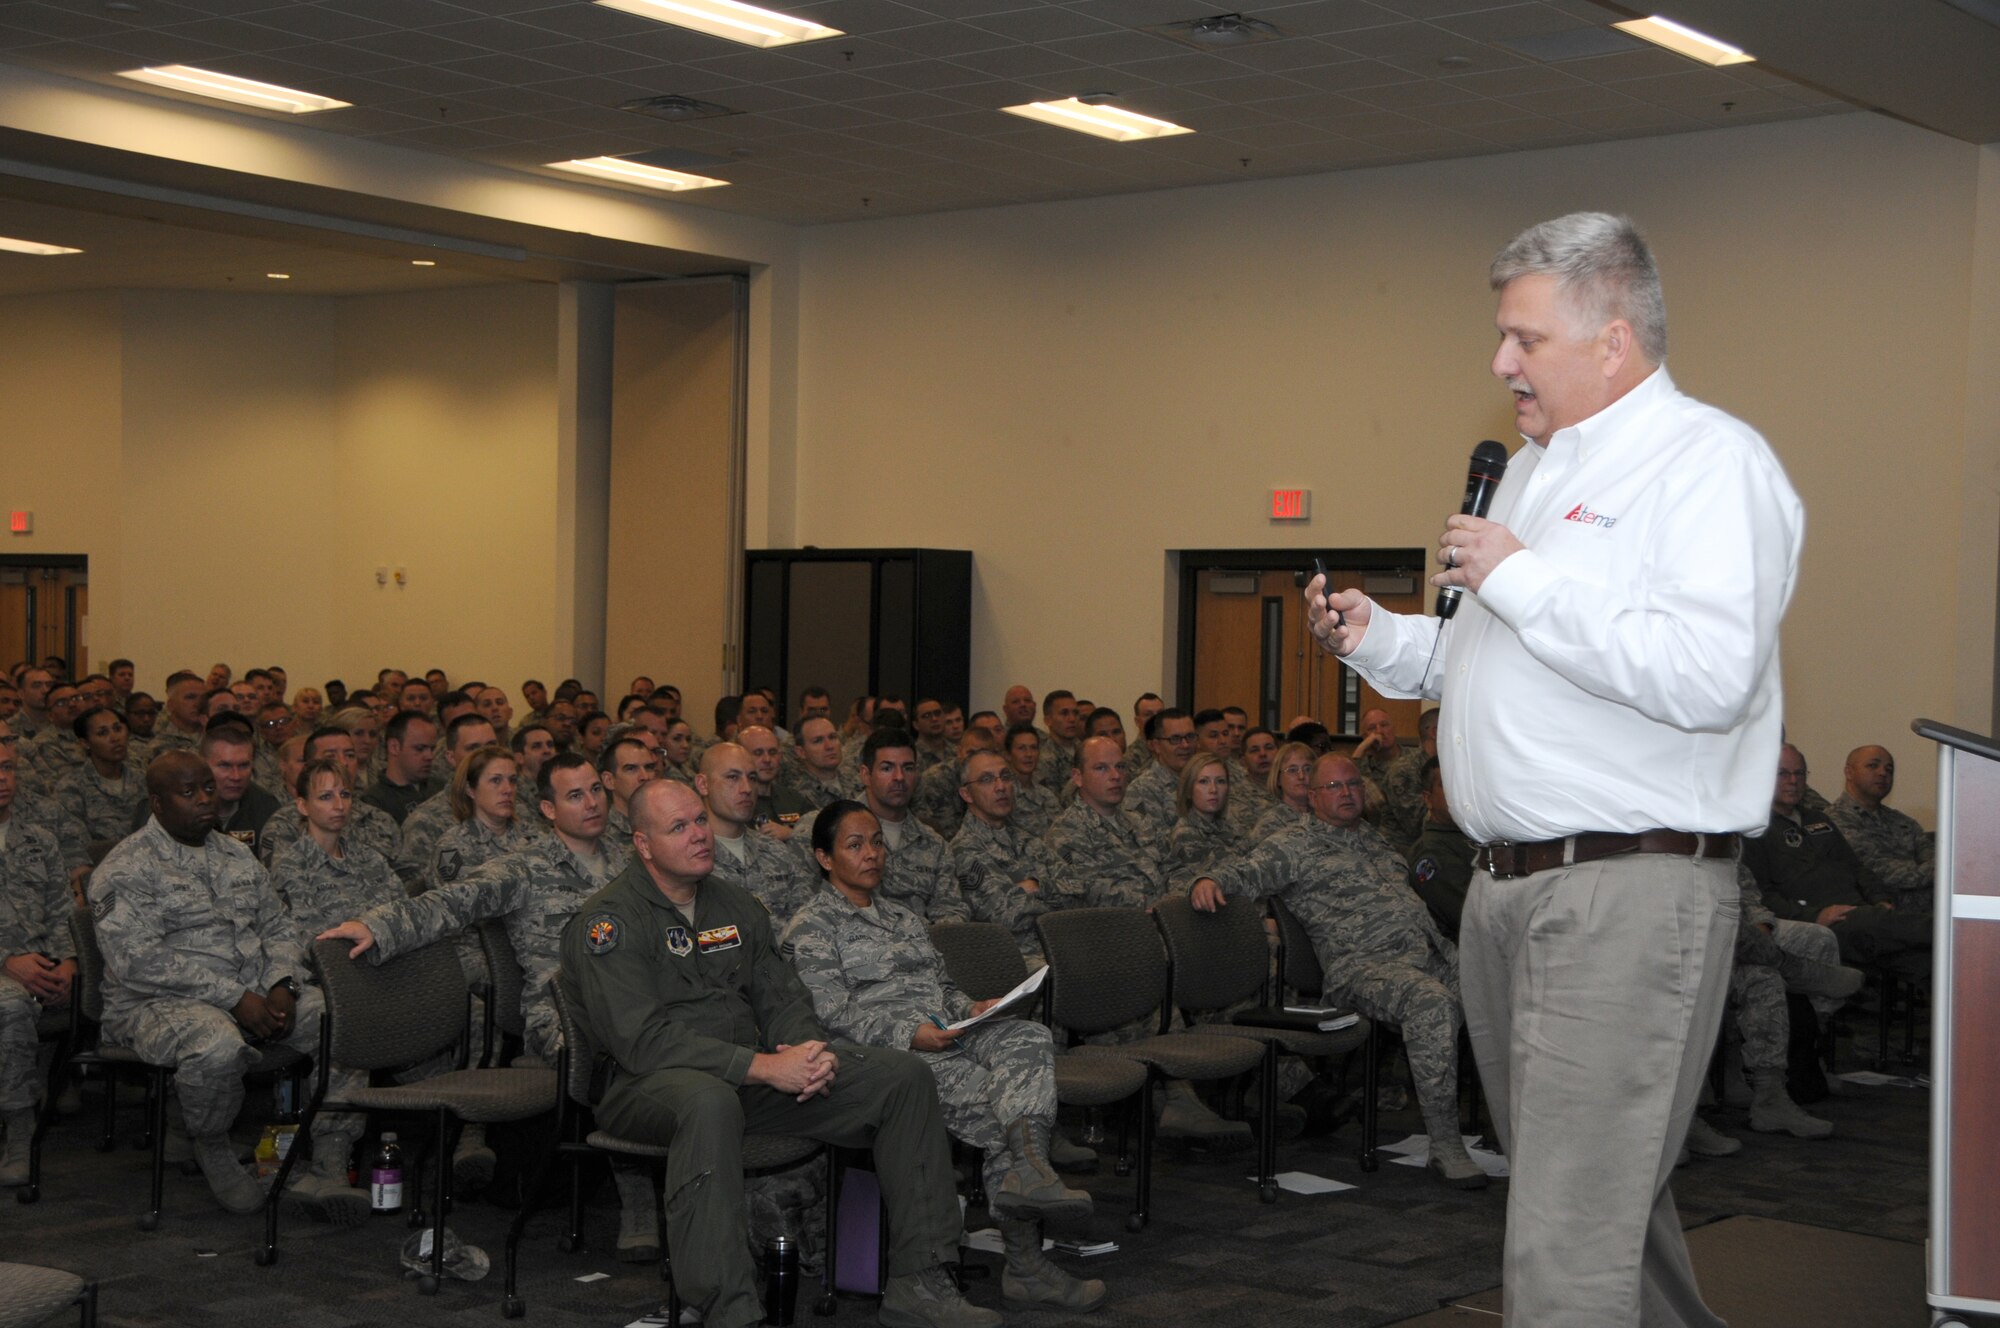 Tim Neubauer, safety director at Atema Inc., briefs Guardsmen from the 161st Air Refueling Wing, in Phoenix as part of the wing’s Resilience, Risk Reduction and Suicide Prevention down day during September’s unit training assembly, Sept. 12, 2015. Neubauer is a safety professional with more than 15 years of field experience and was a senior consultant for the National Safety Council. The R3SP program’s primary mission is to ensure Guardsmen are properly trained in resilience and suicide prevention skills. (U.S. Air National Guard photo by Tech. Sgt. Michael Matkin)